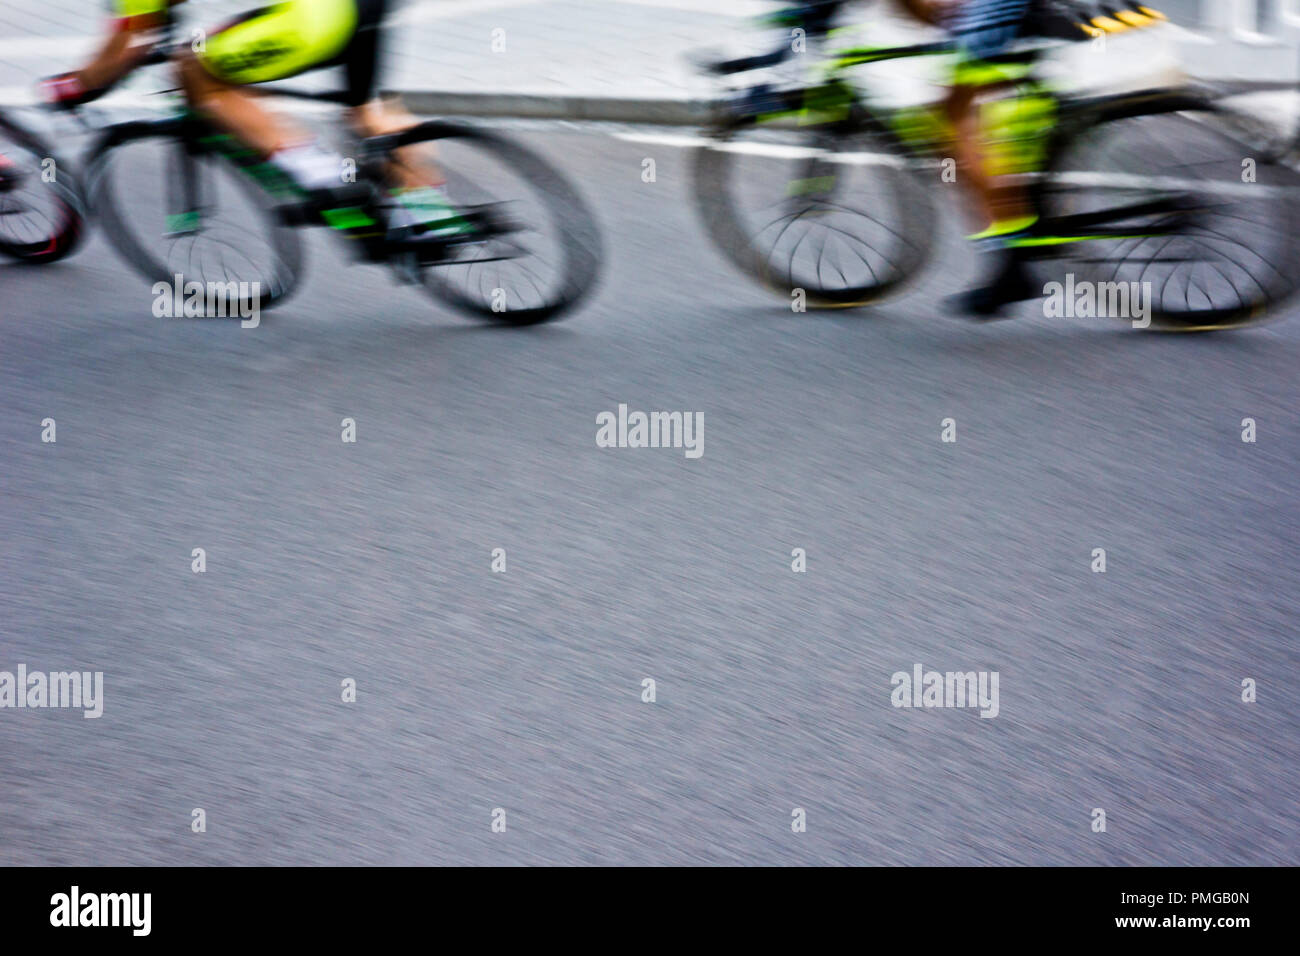 professional cyclists sprinting during a city road bicycle racing Stock ...